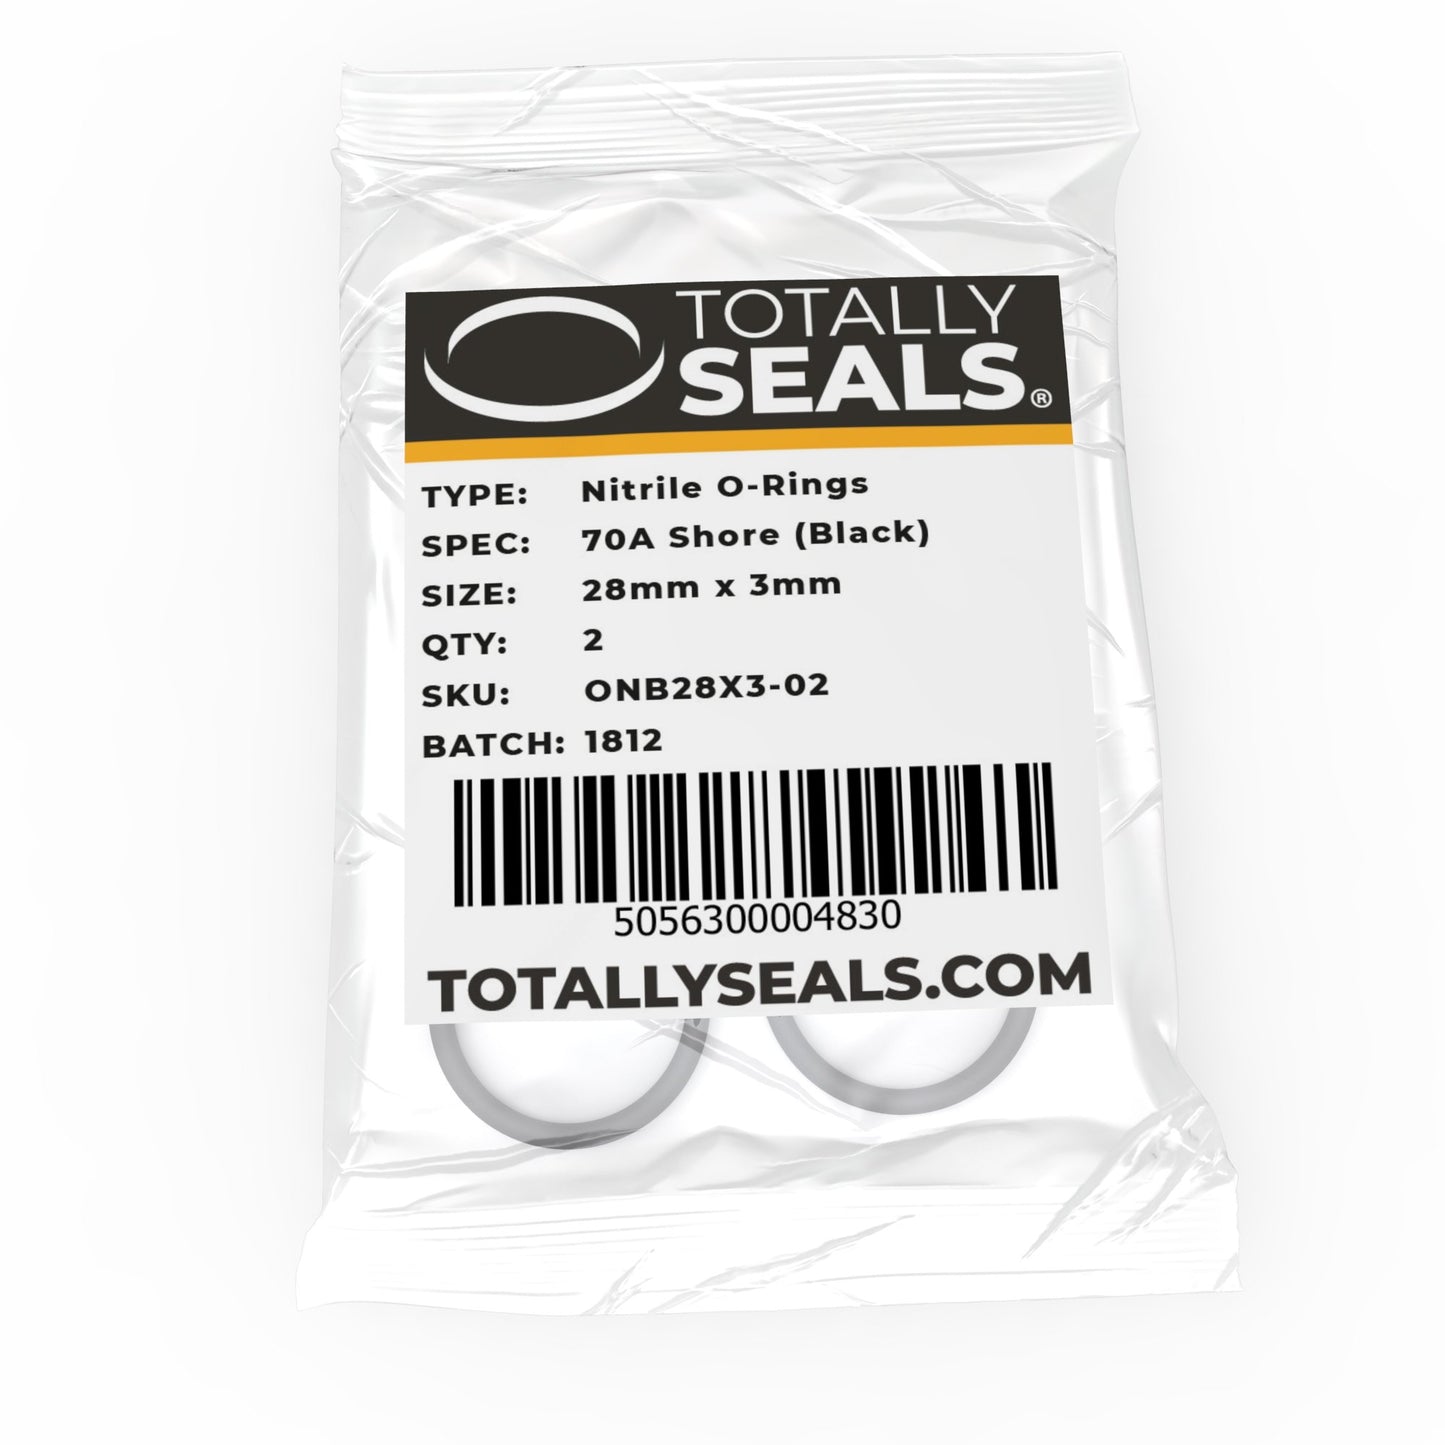 28mm x 3mm (34mm OD) Nitrile O-Rings - Totally Seals®